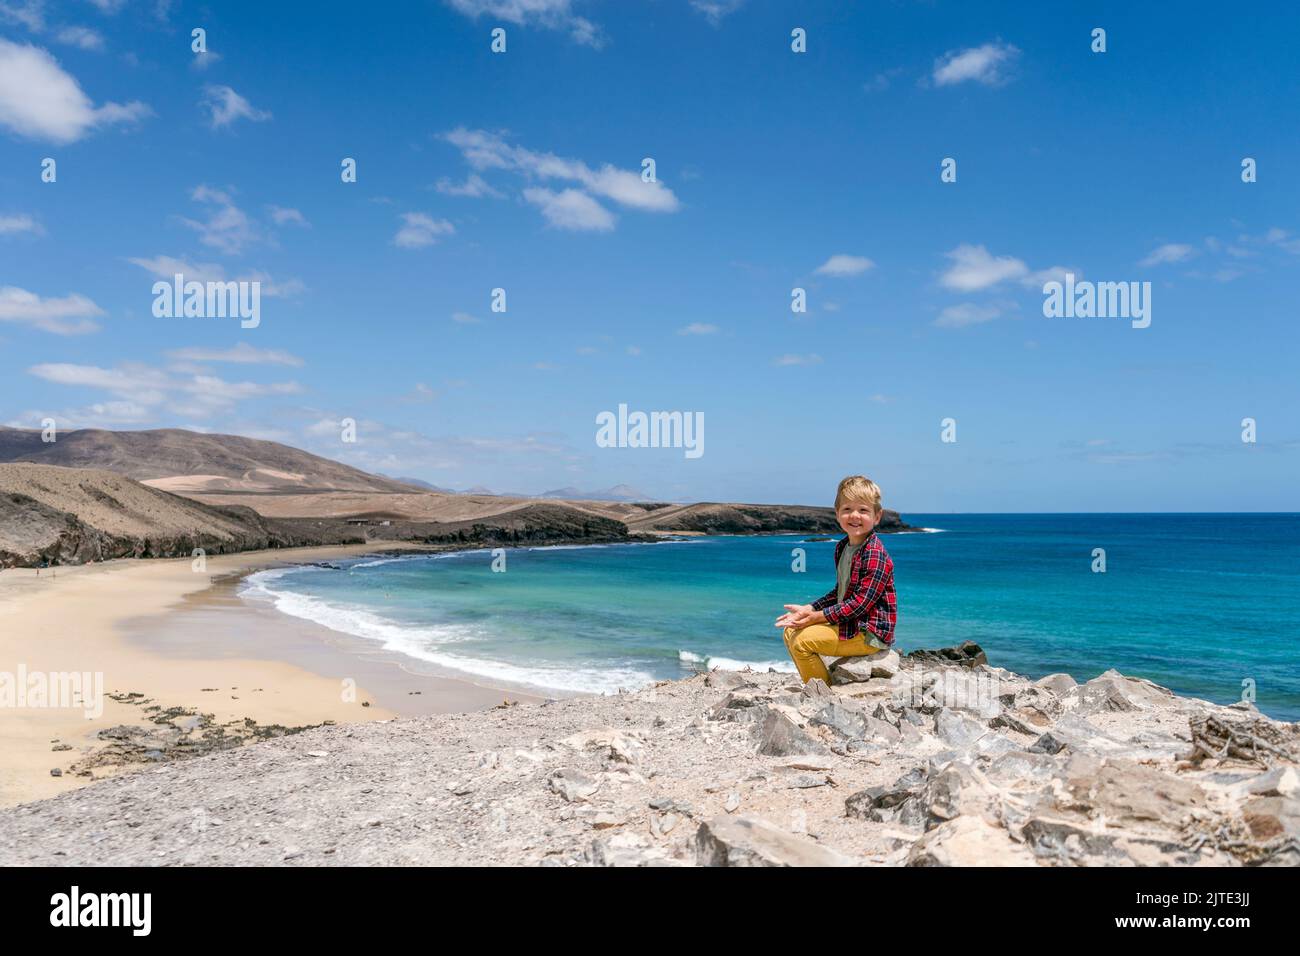 Small boy enjoying the landscape of beach called Caleta del Congrio in Los Ajaches National Park at Lanzarote, Canary Islands, Spain Stock Photo